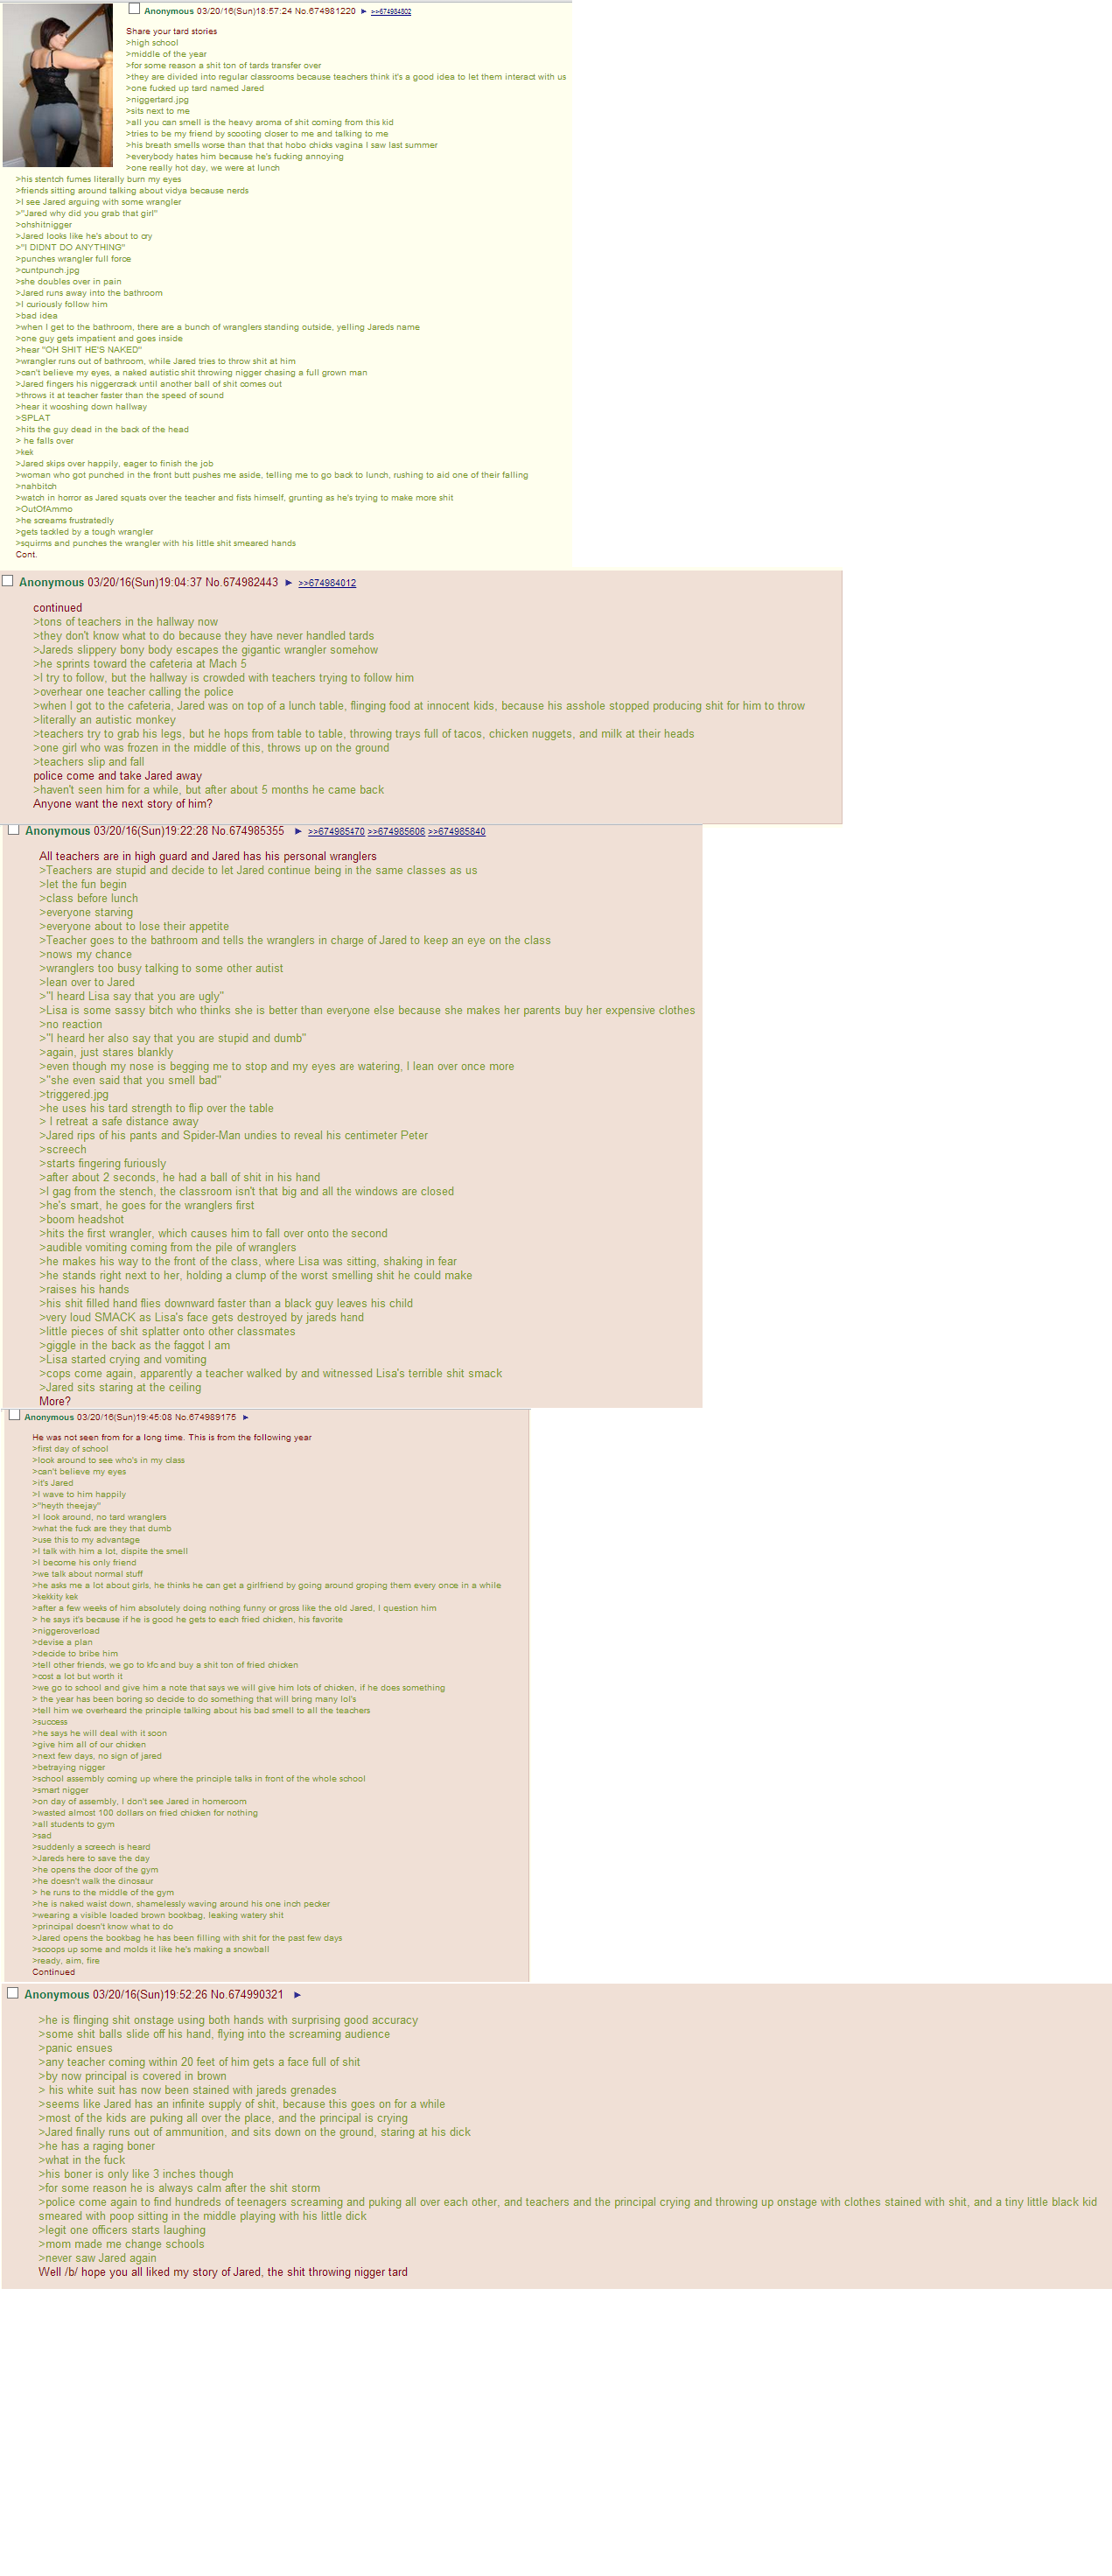 greentext master reporting for duty *salutes*